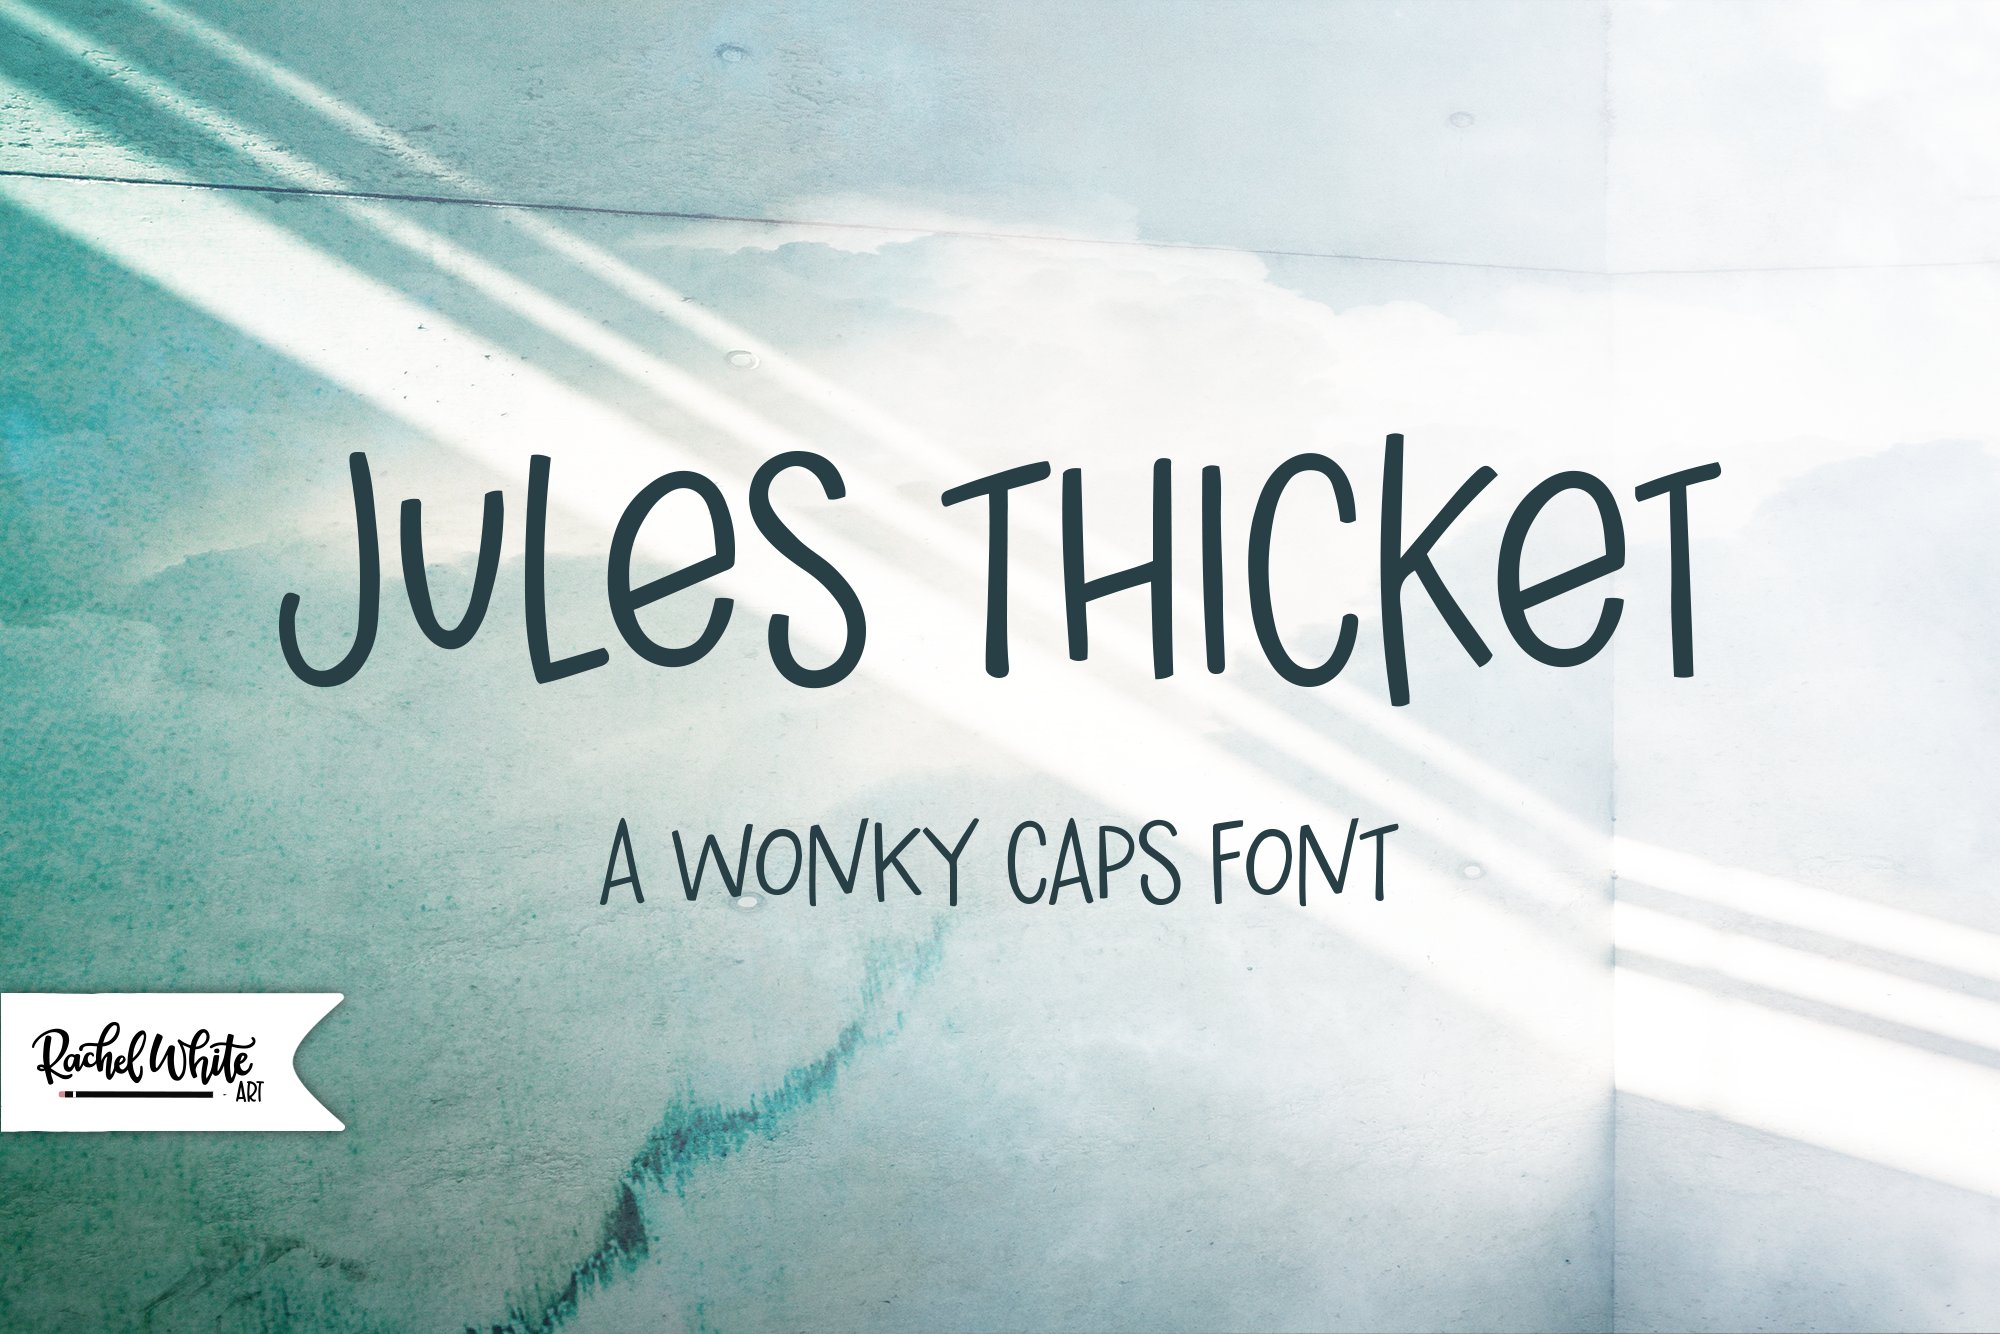 Jules Thicket, a wonky caps font cover image.